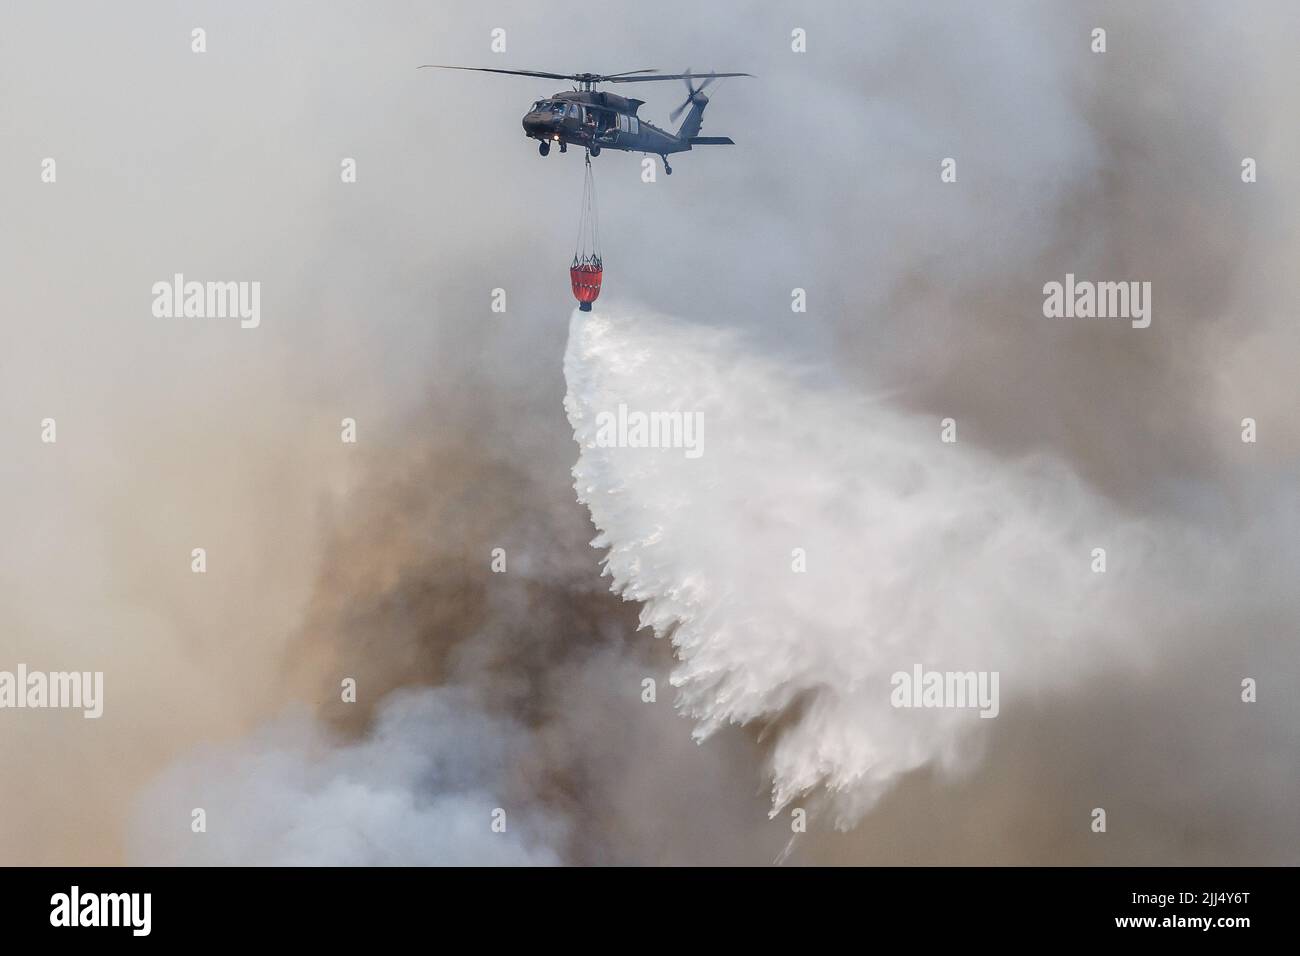 Karst, Slovenia. 22nd July, 2022. A Slovakian Sikorsky UH-60 Black Hawk helicopter carrying a Bambi bucket for extinguishing fires drops water on a large wildfire that burns near the village of Novelo in the Karst region of Slovenia. About a thousand firemen with air support from three Slovenian helicopters, two Serbian helicopters, an Austrian helicopter, a Slovakian Black Hawk helicopter and two Hungarian helicopters, a Croatian Canadair firefighting airplane and a Slovenian army Pilatus airplane continued battling a large wildfire that broke out five days ago and has intensified in the Kars Stock Photo